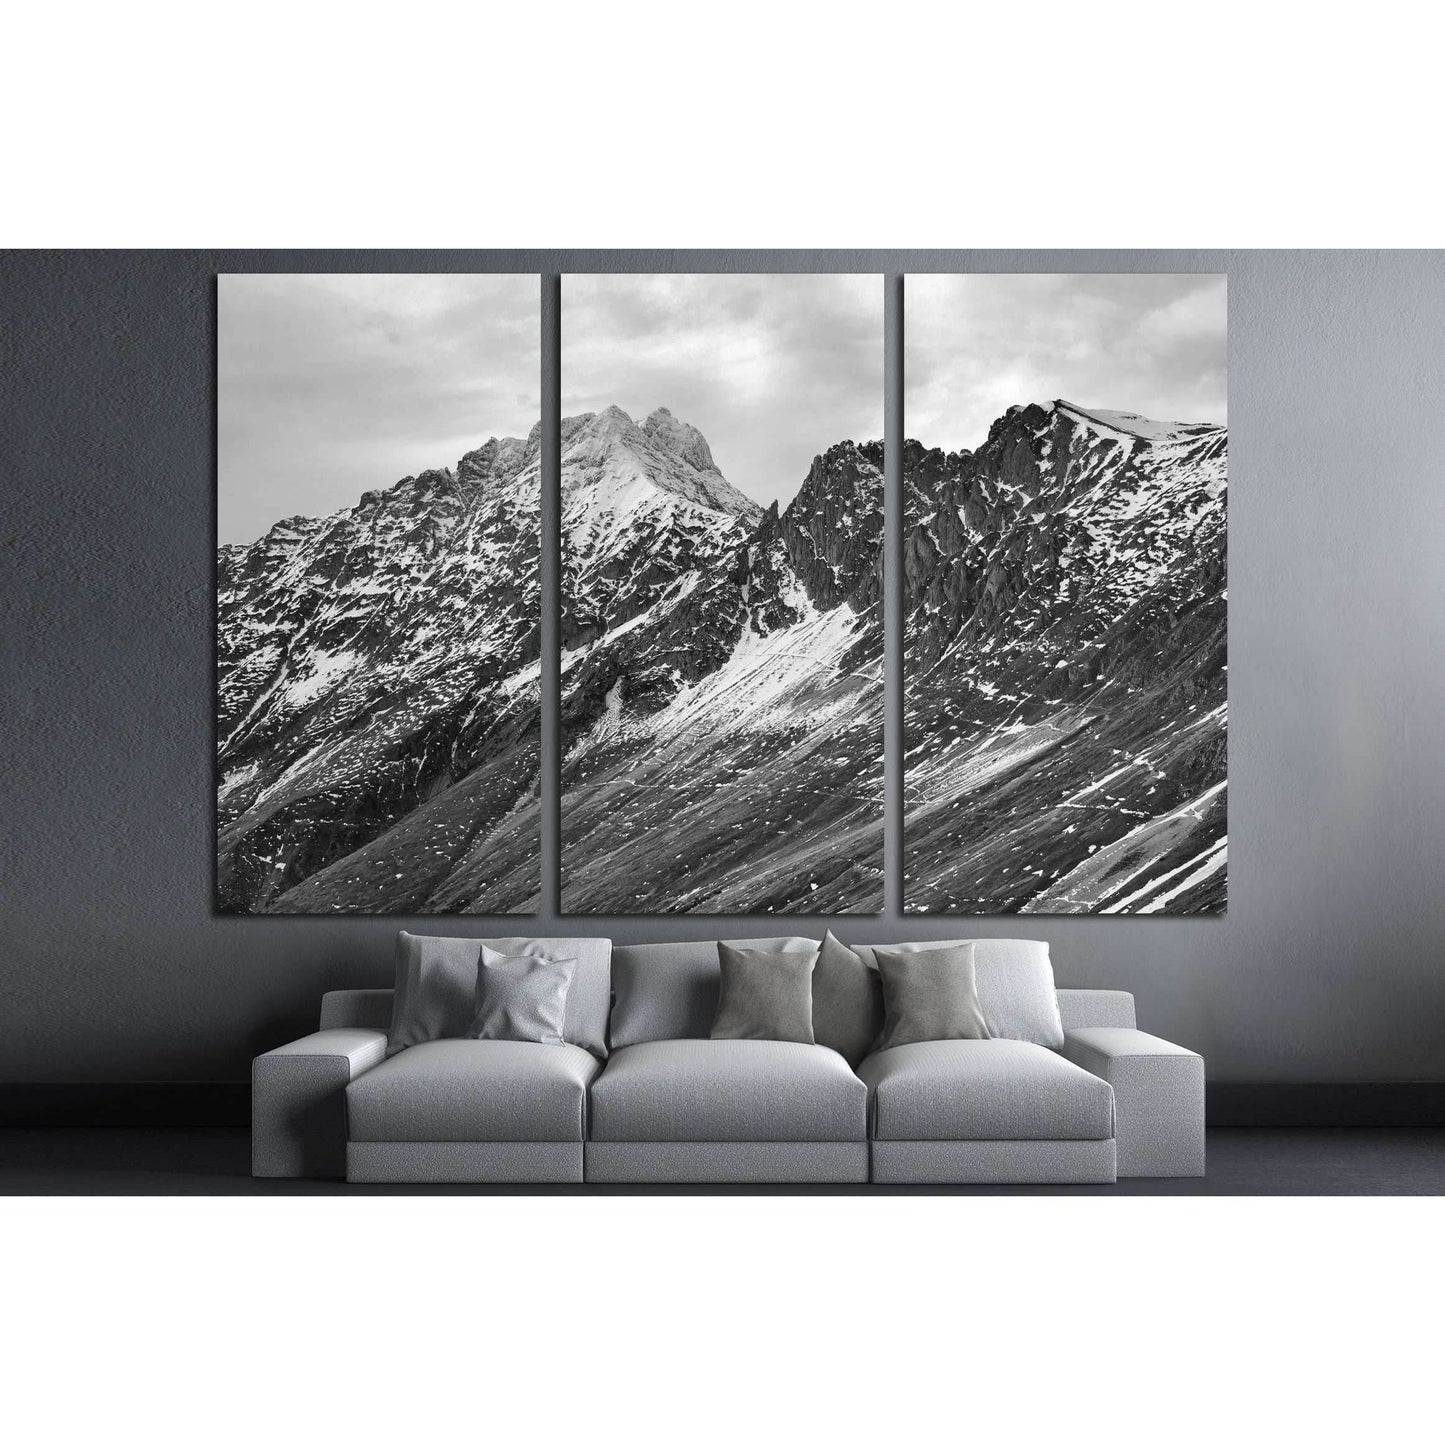 Black and White Rugged Mountains Wall Art for Modern InteriorsThis canvas print presents a striking black and white image of rugged mountain peaks, their sharp contrasts and textures highlighted to create a sense of depth and grandeur. It's a timeless pie